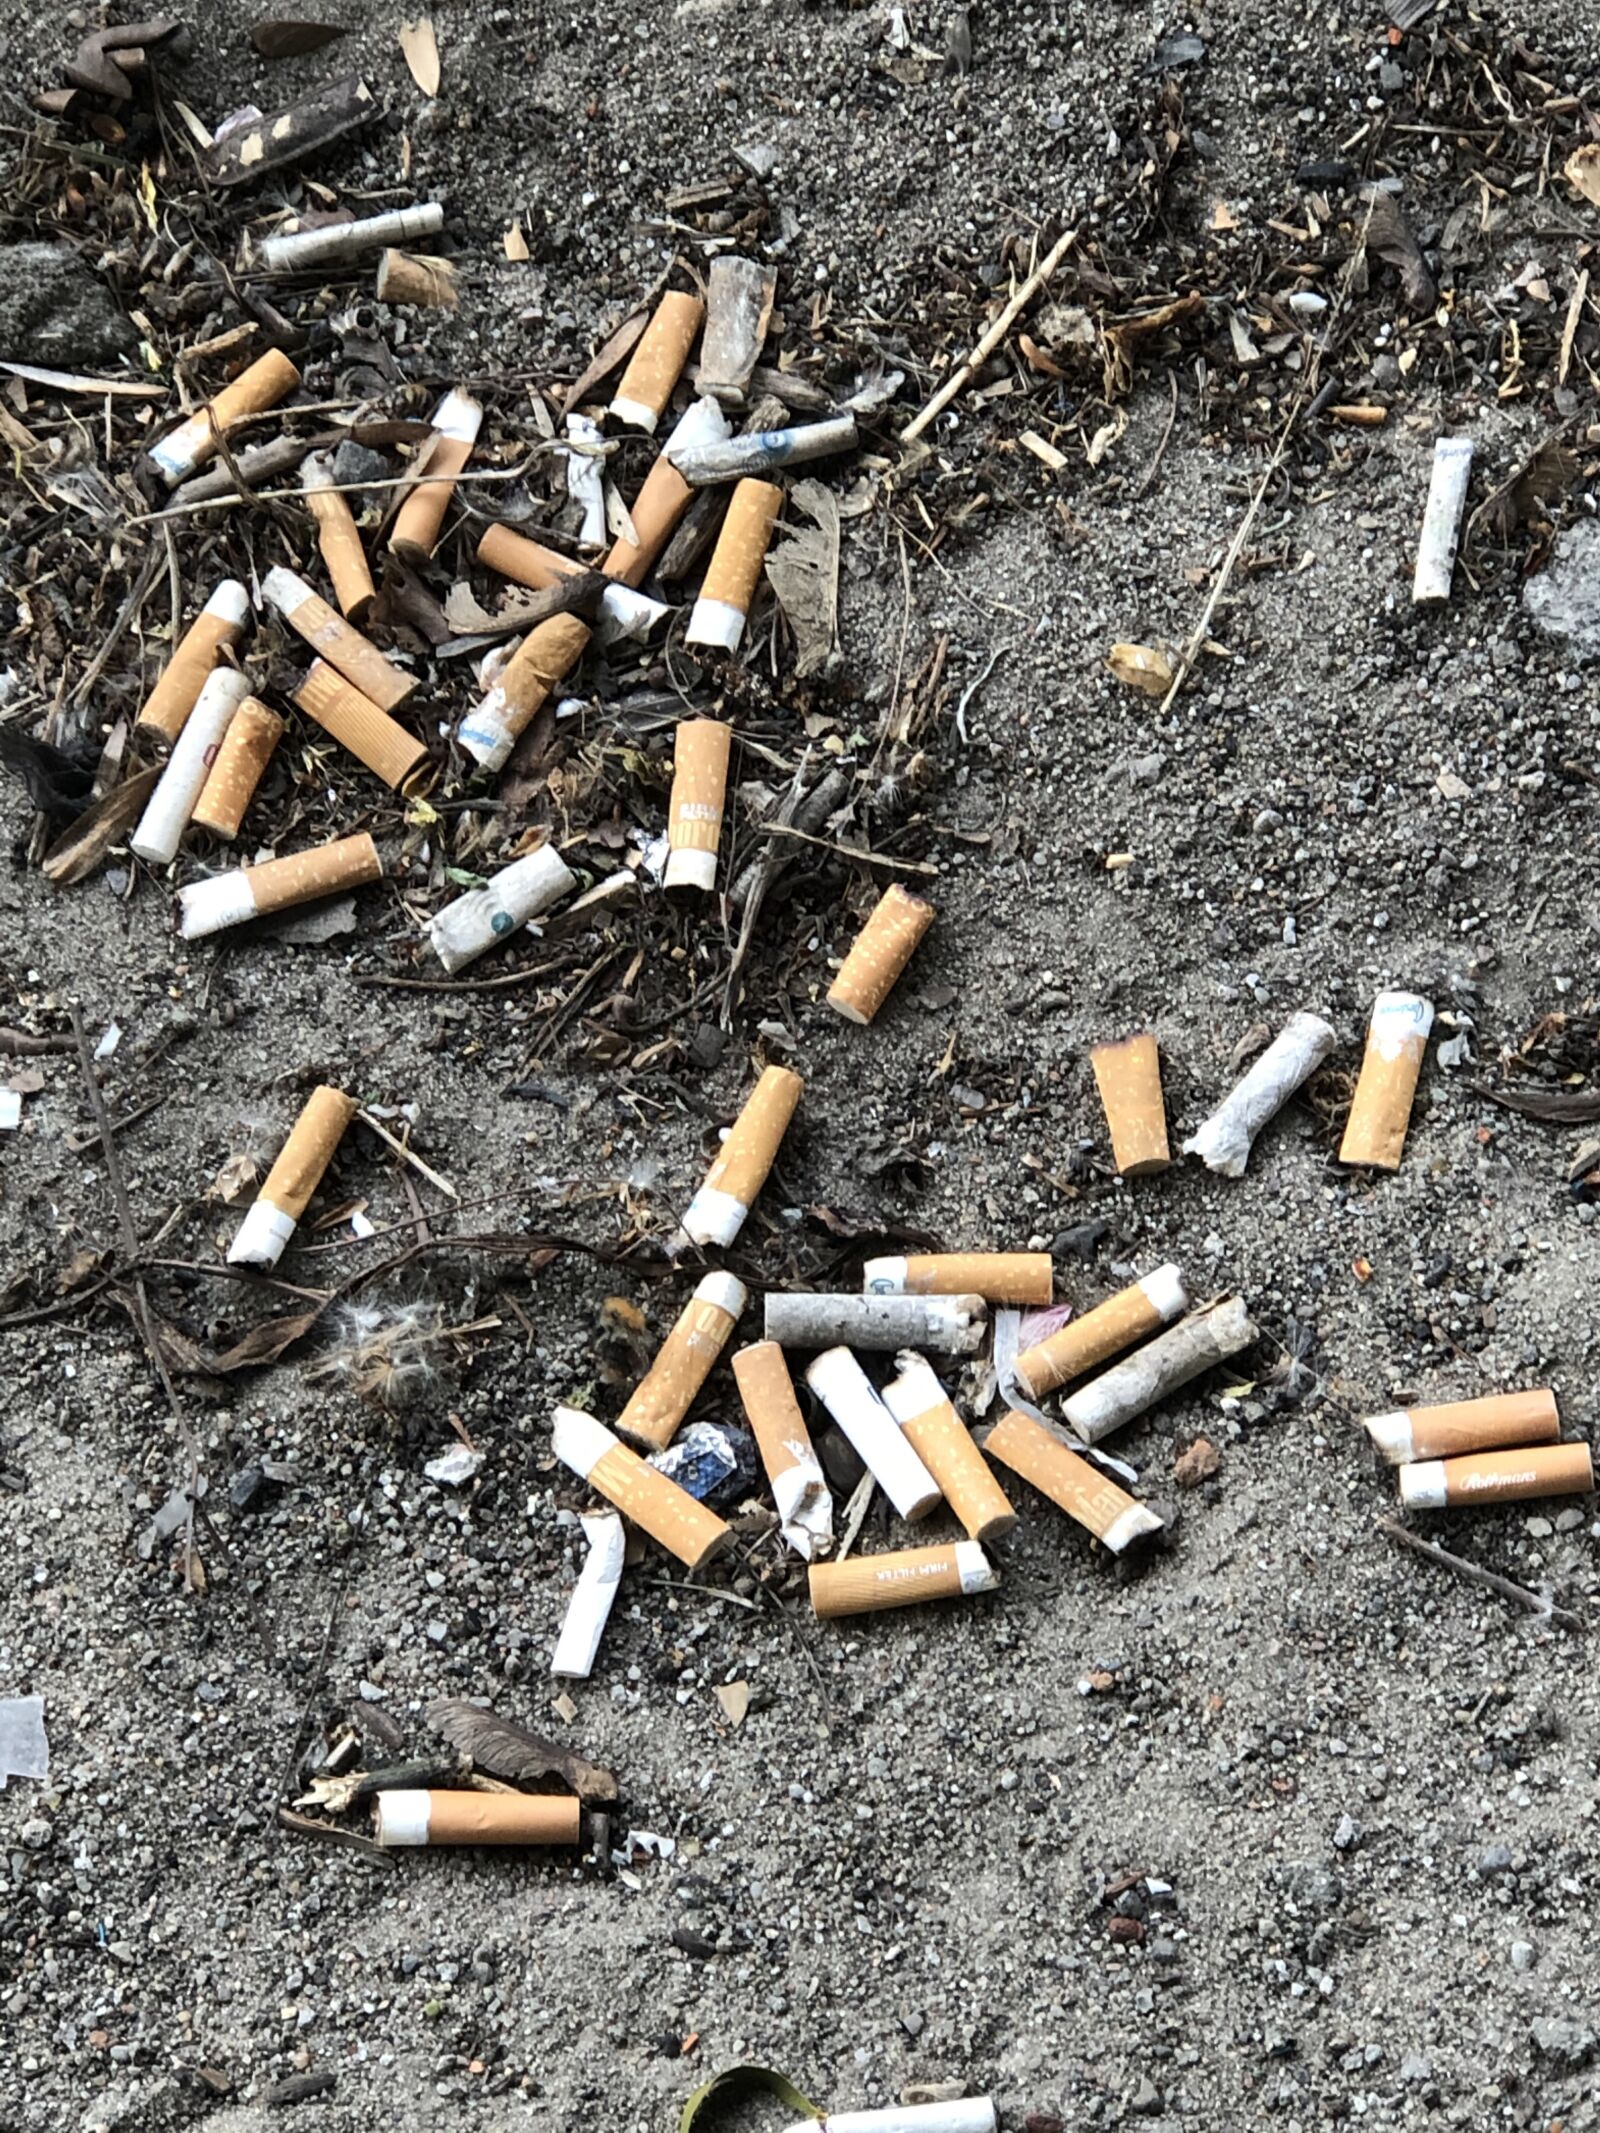 iPhone 8 Plus back dual camera 6.6mm f/2.8 sample photo. Cigarettes, garbage, ecology photography